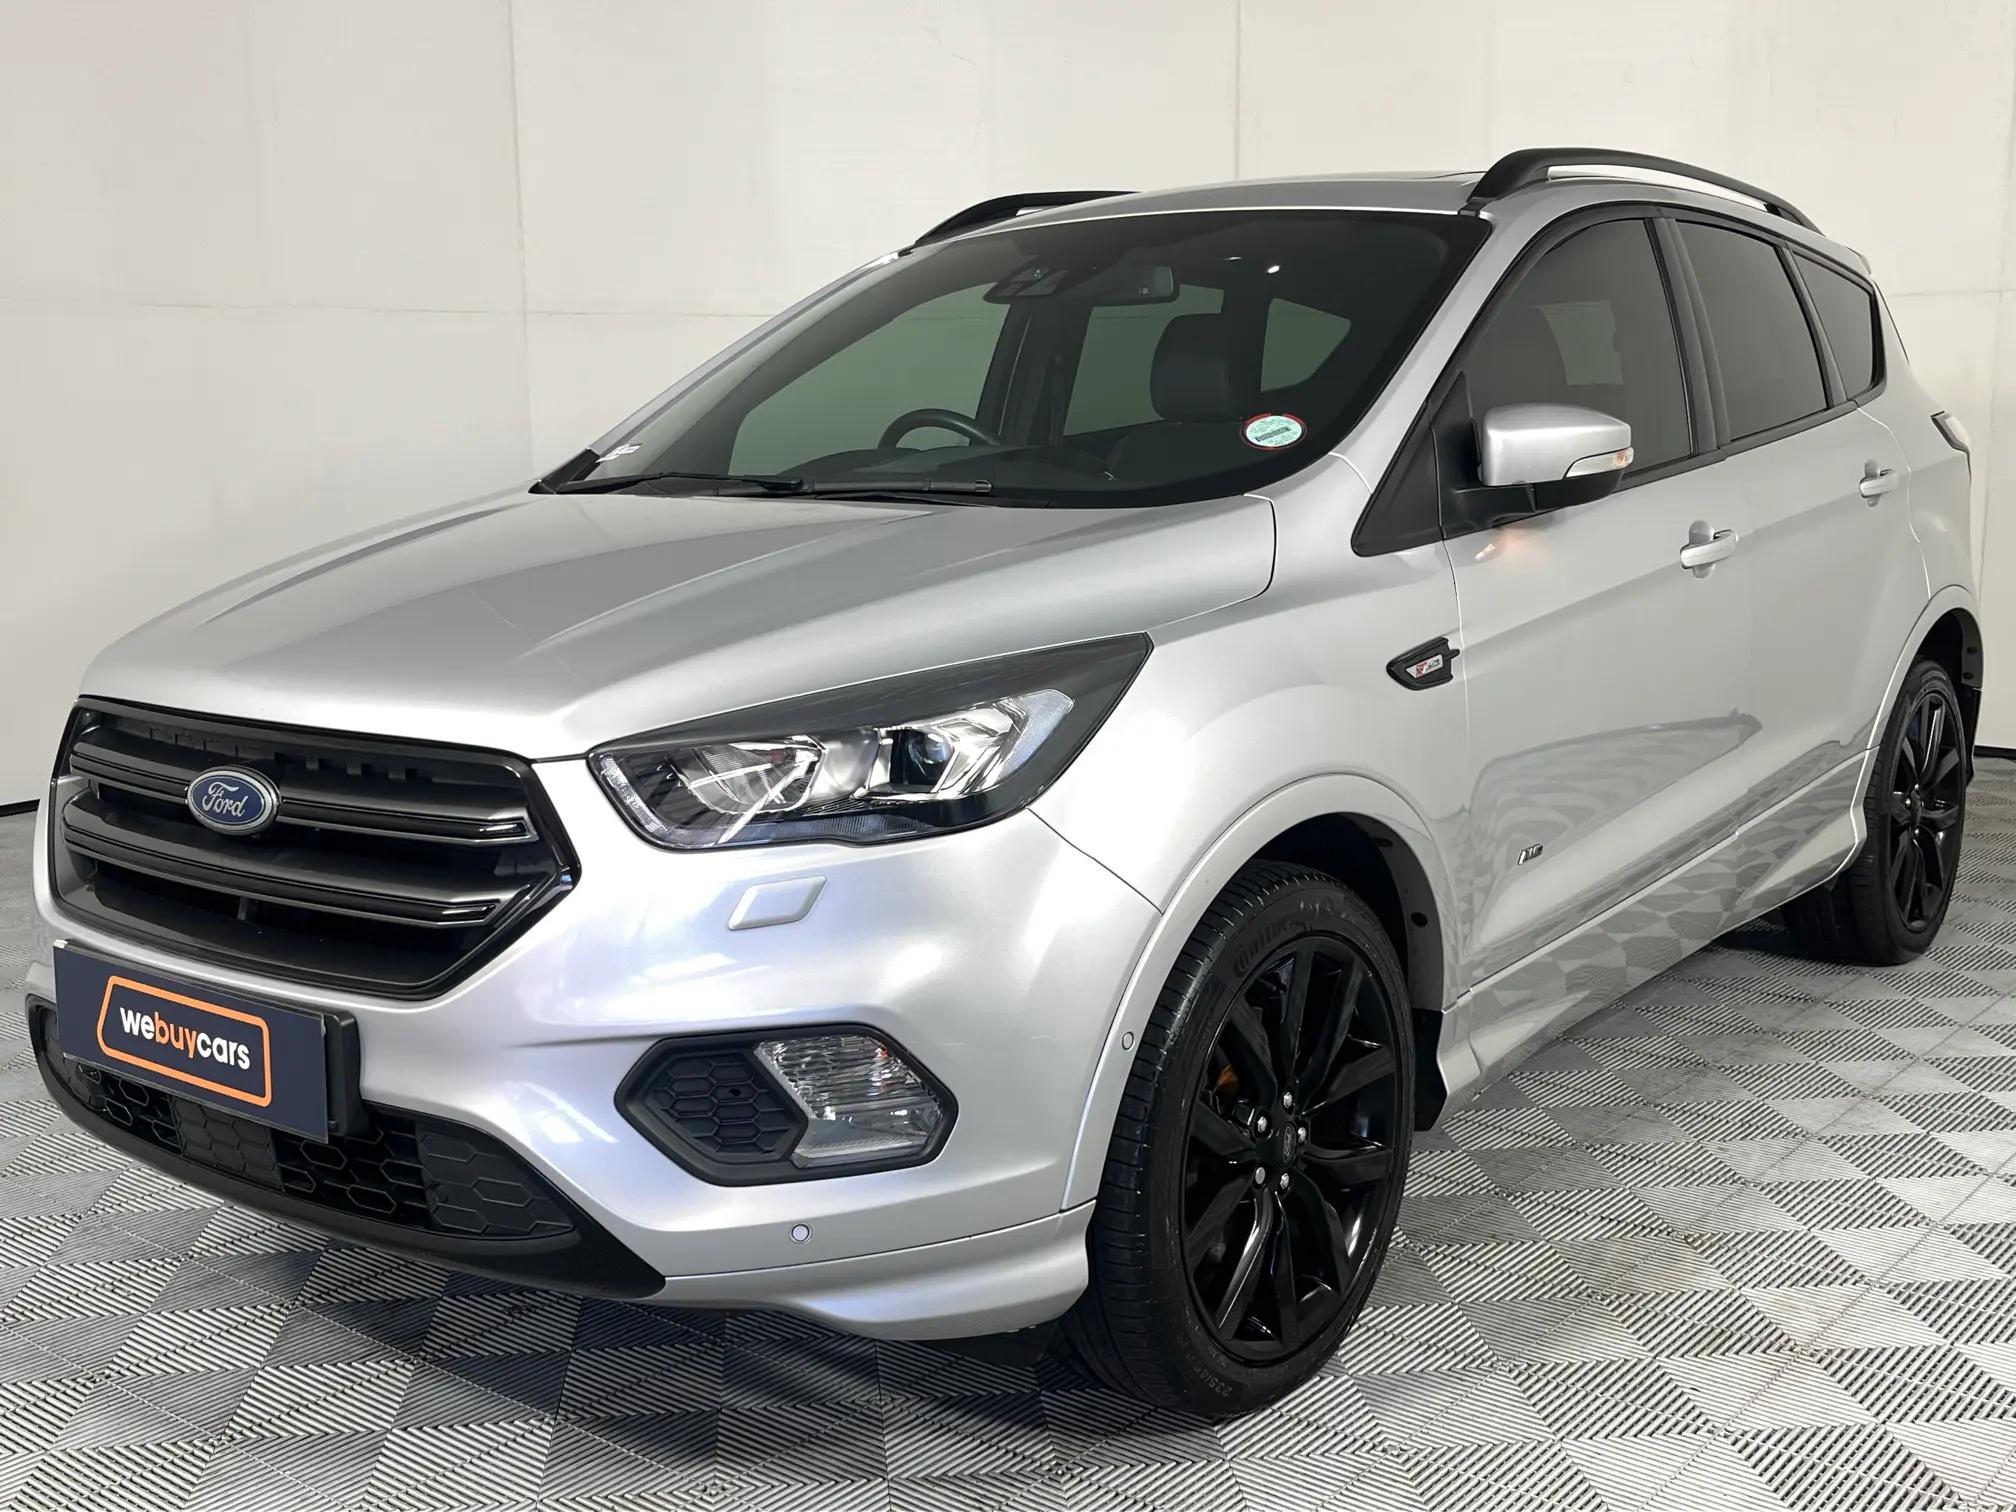 Ford Kuga Cars for sale in Cape Town Western Cape - New and Used